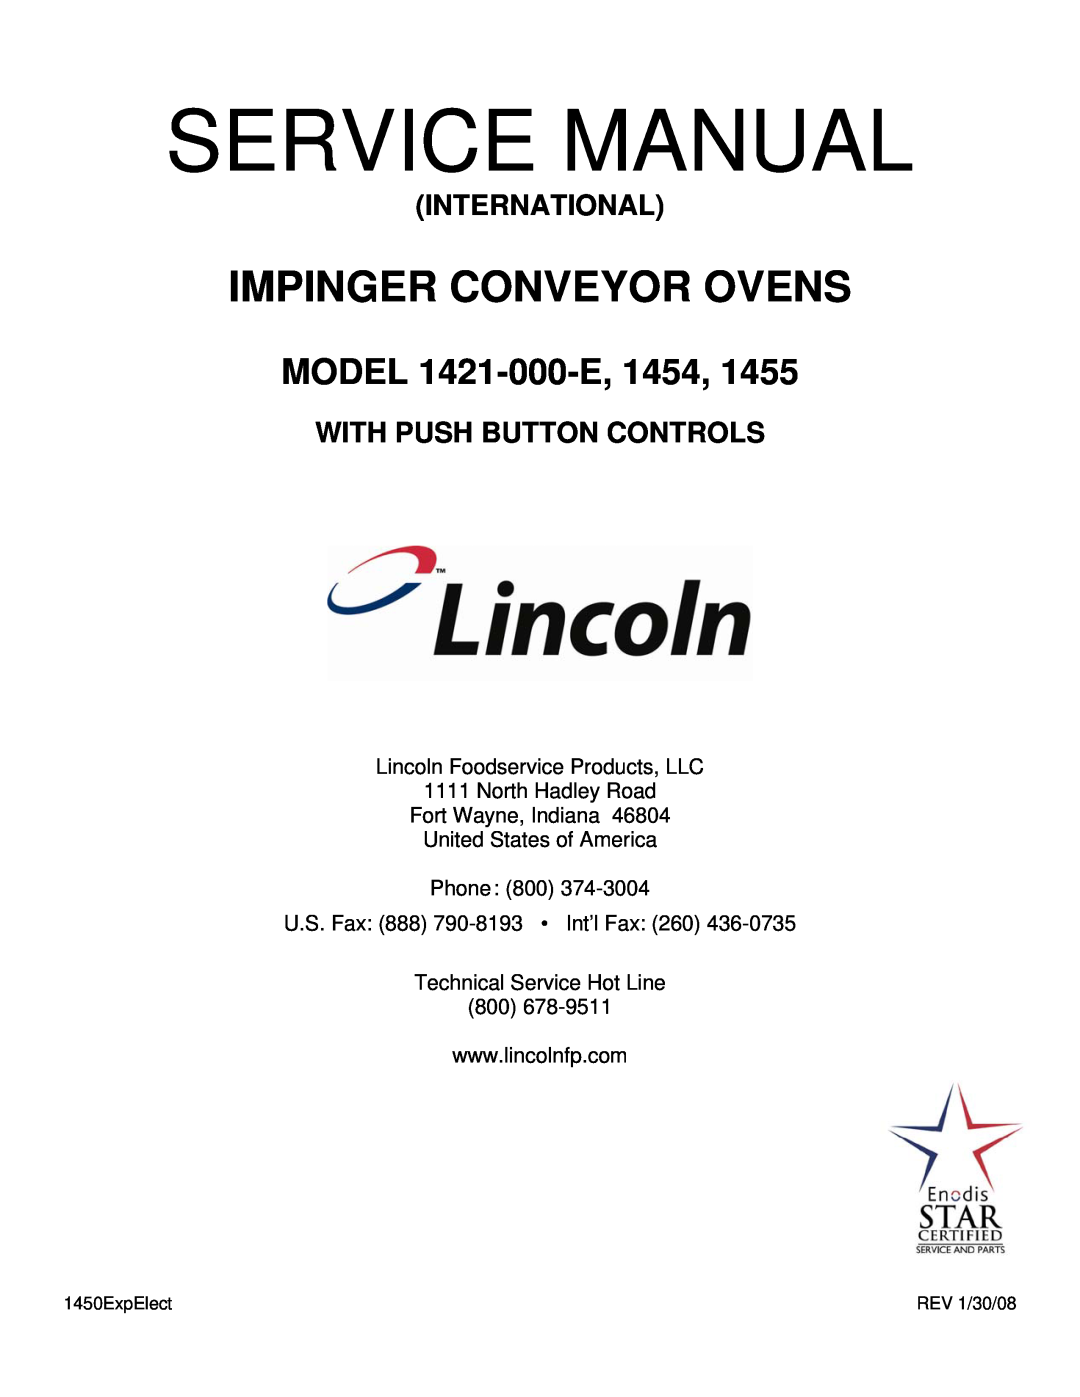 Lincoln 1421-000-E service manual Lincoln Foodservice Products, LLC, North Hadley Road Fort Wayne, Indiana, Service Manual 